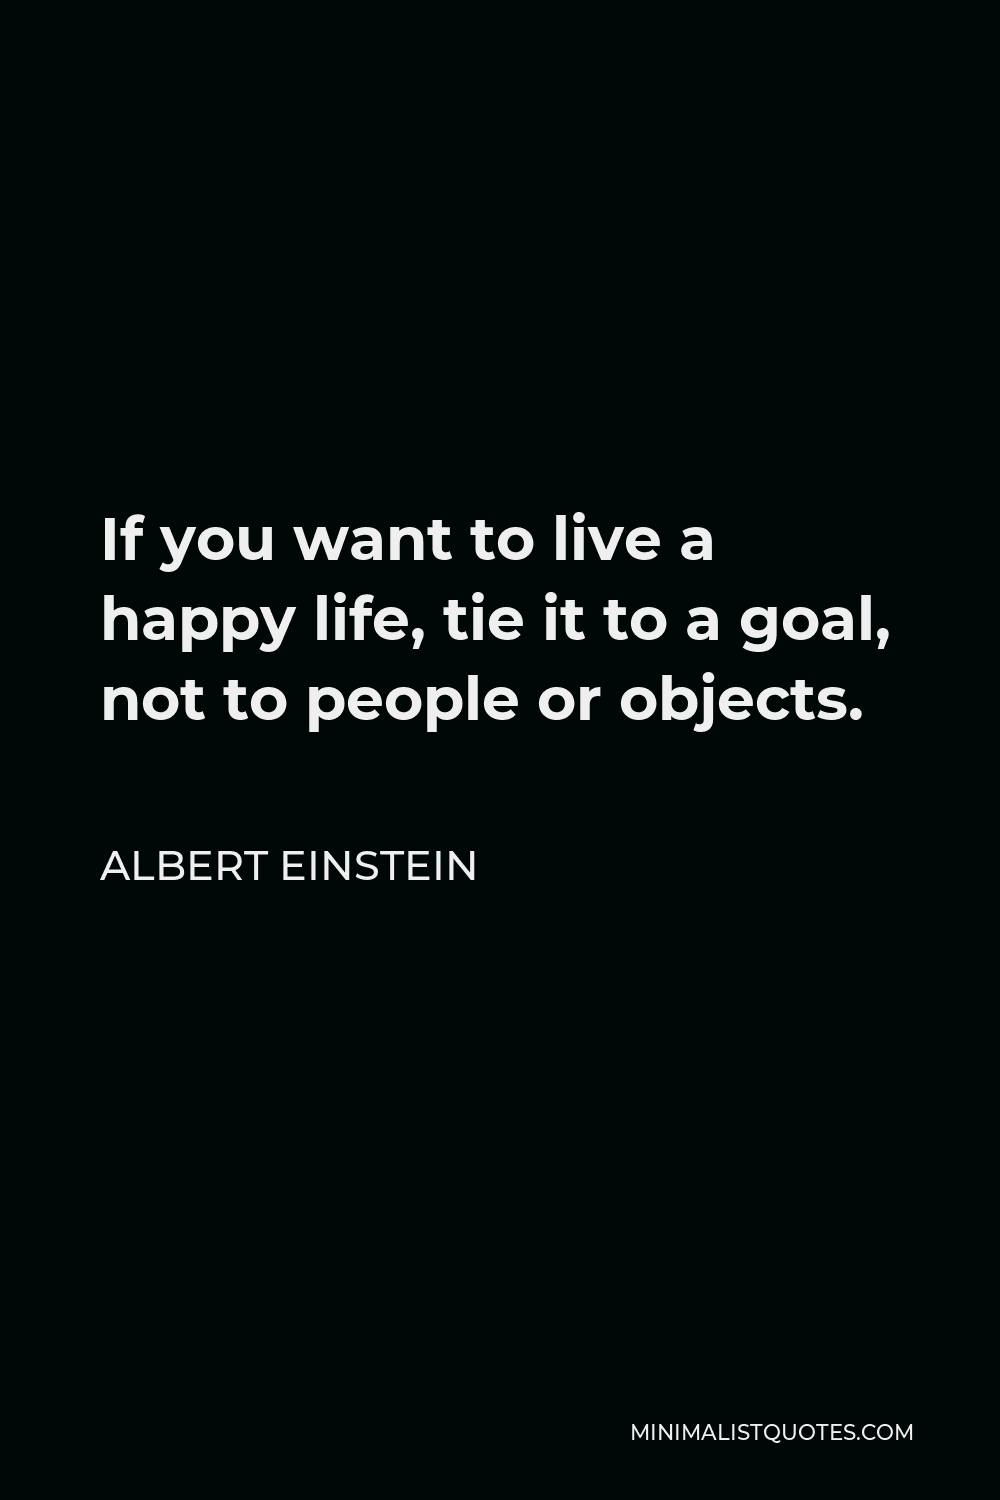 Albert Einstein Quote - If you want to live a happy life, tie it to a goal, not to people or things.